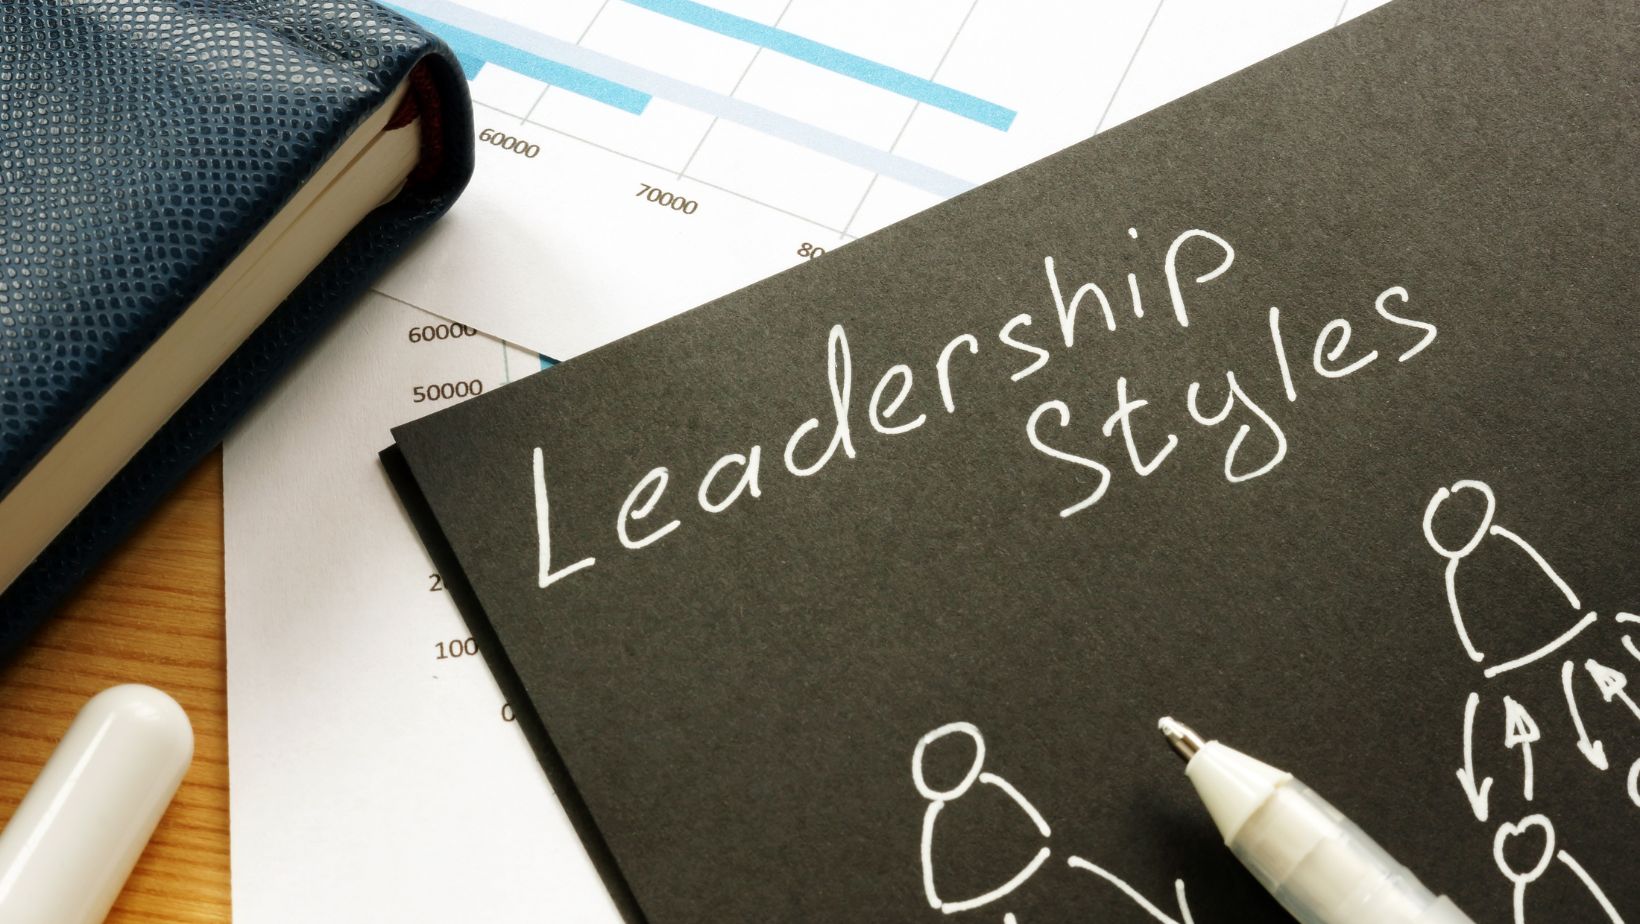 flexibility is a key characteristic for all leadership styles